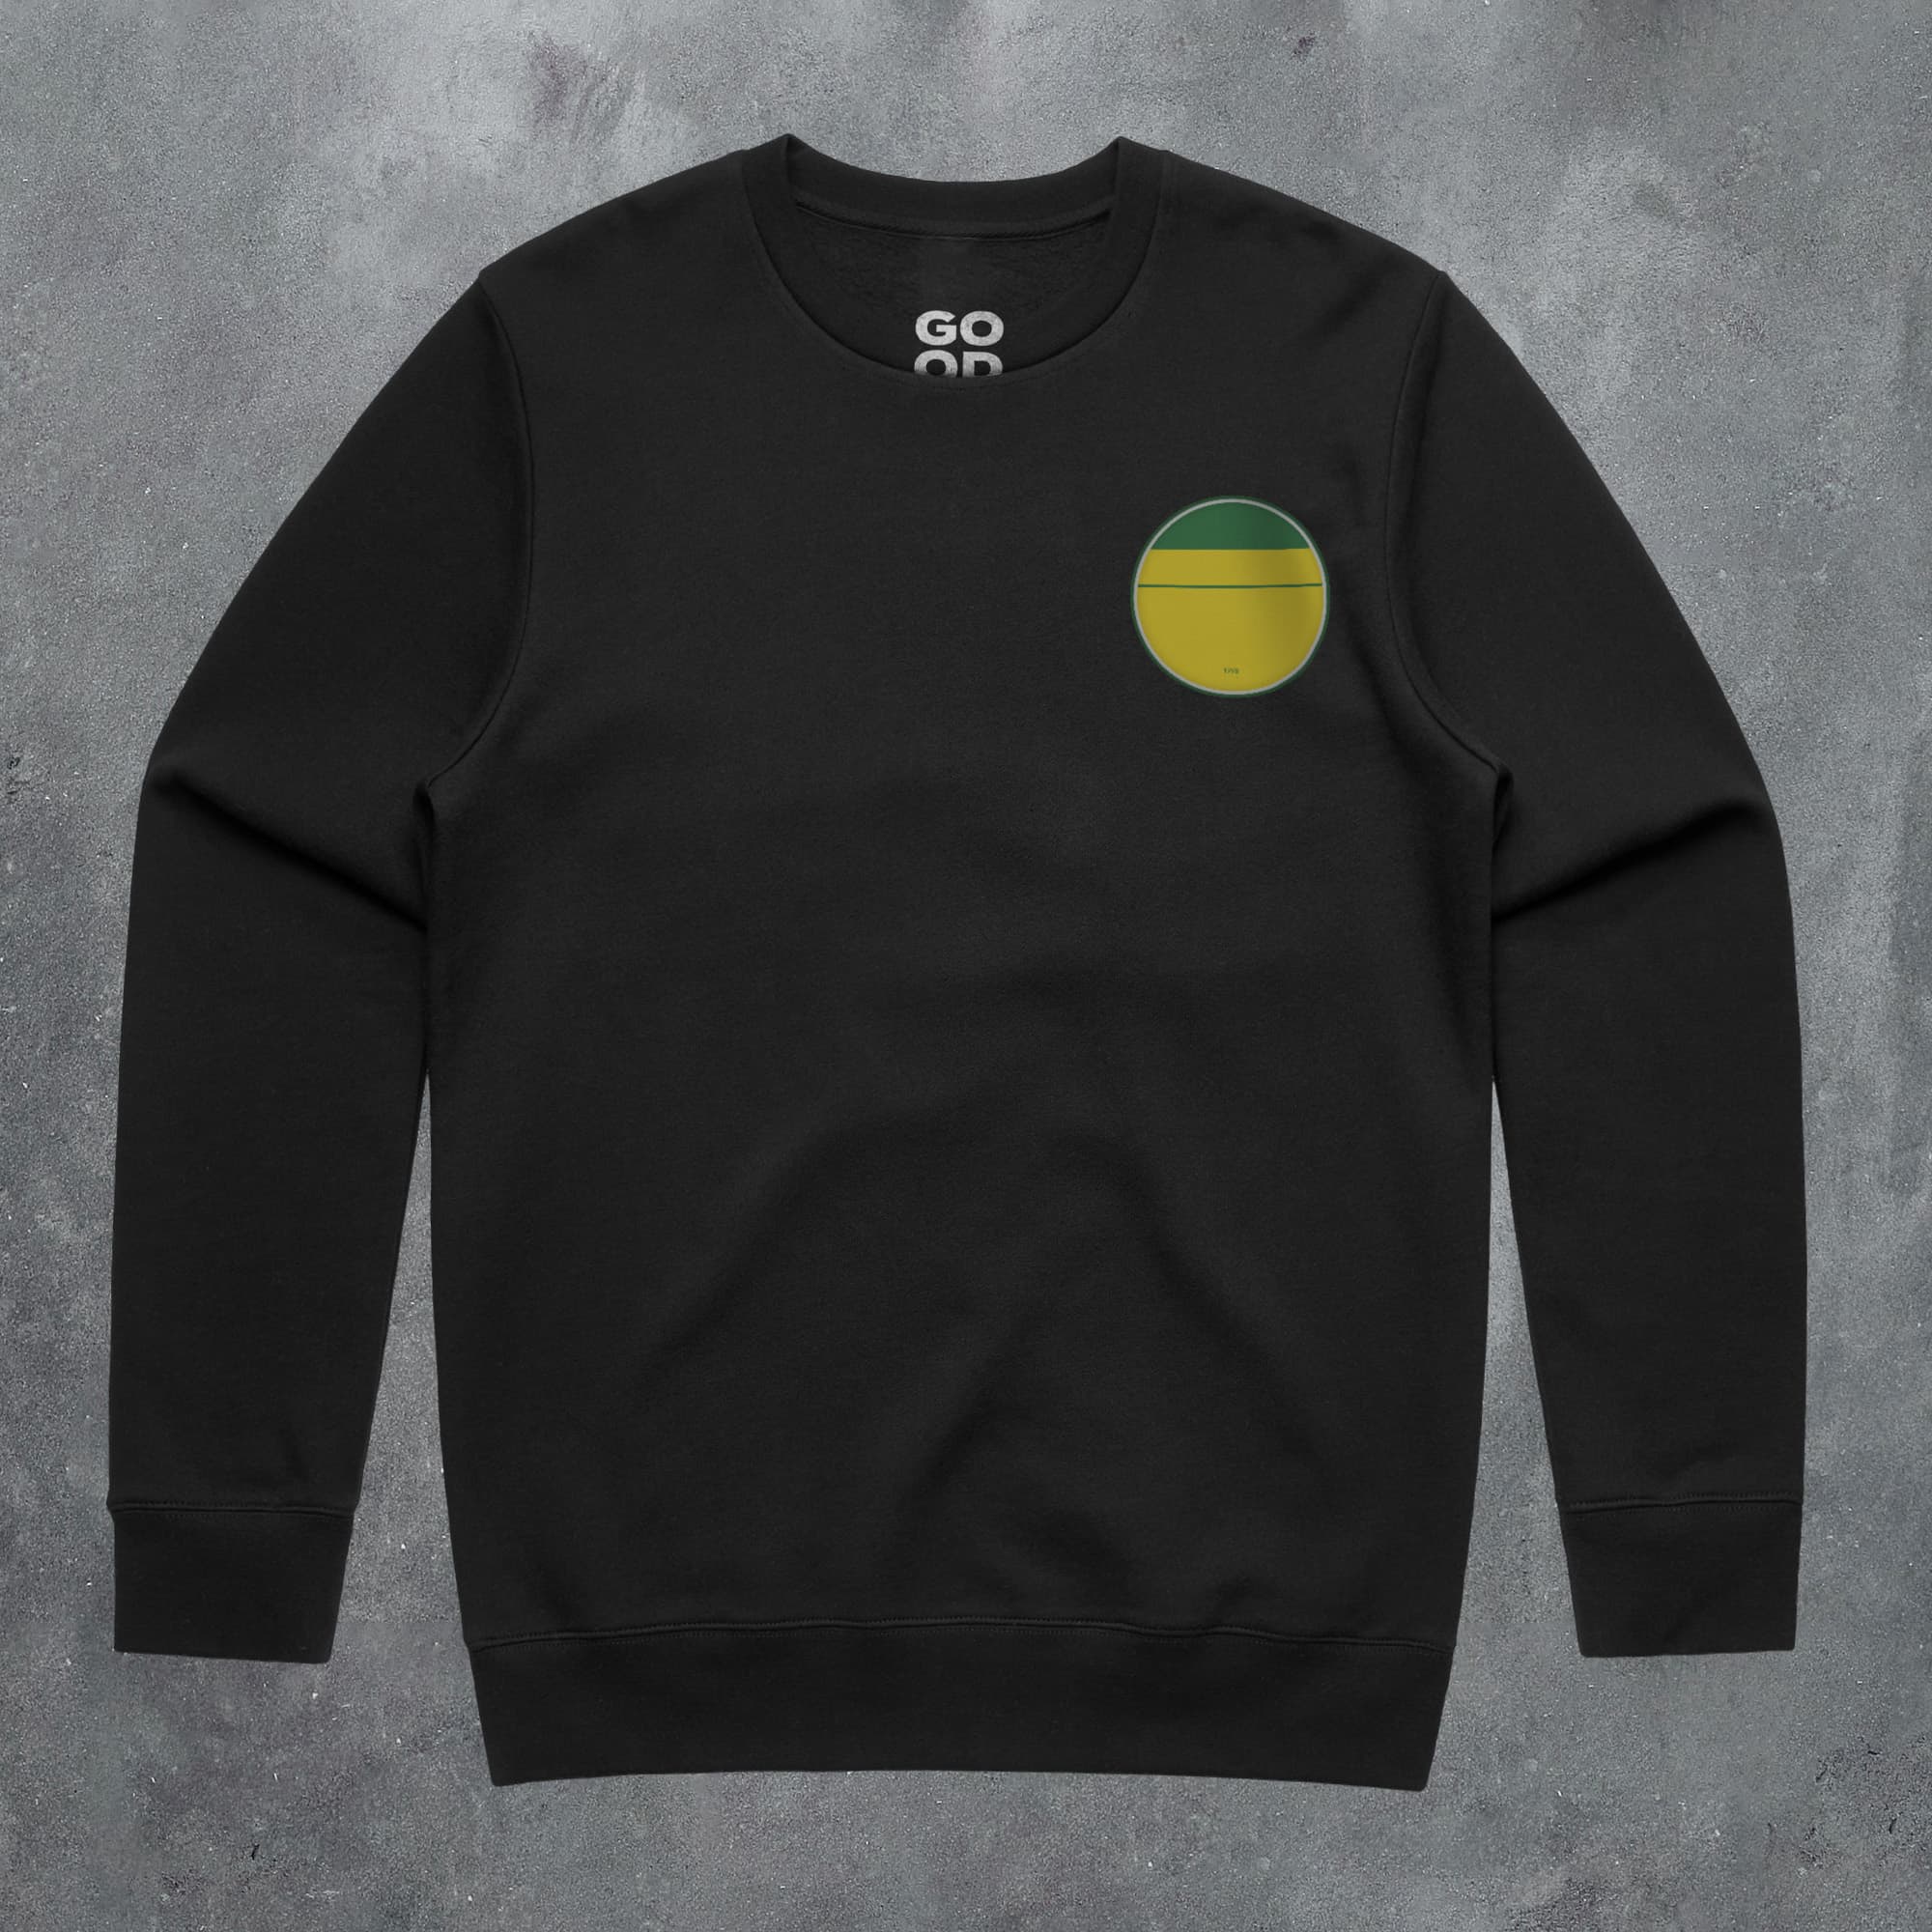 a black sweatshirt with a green and yellow circle on it